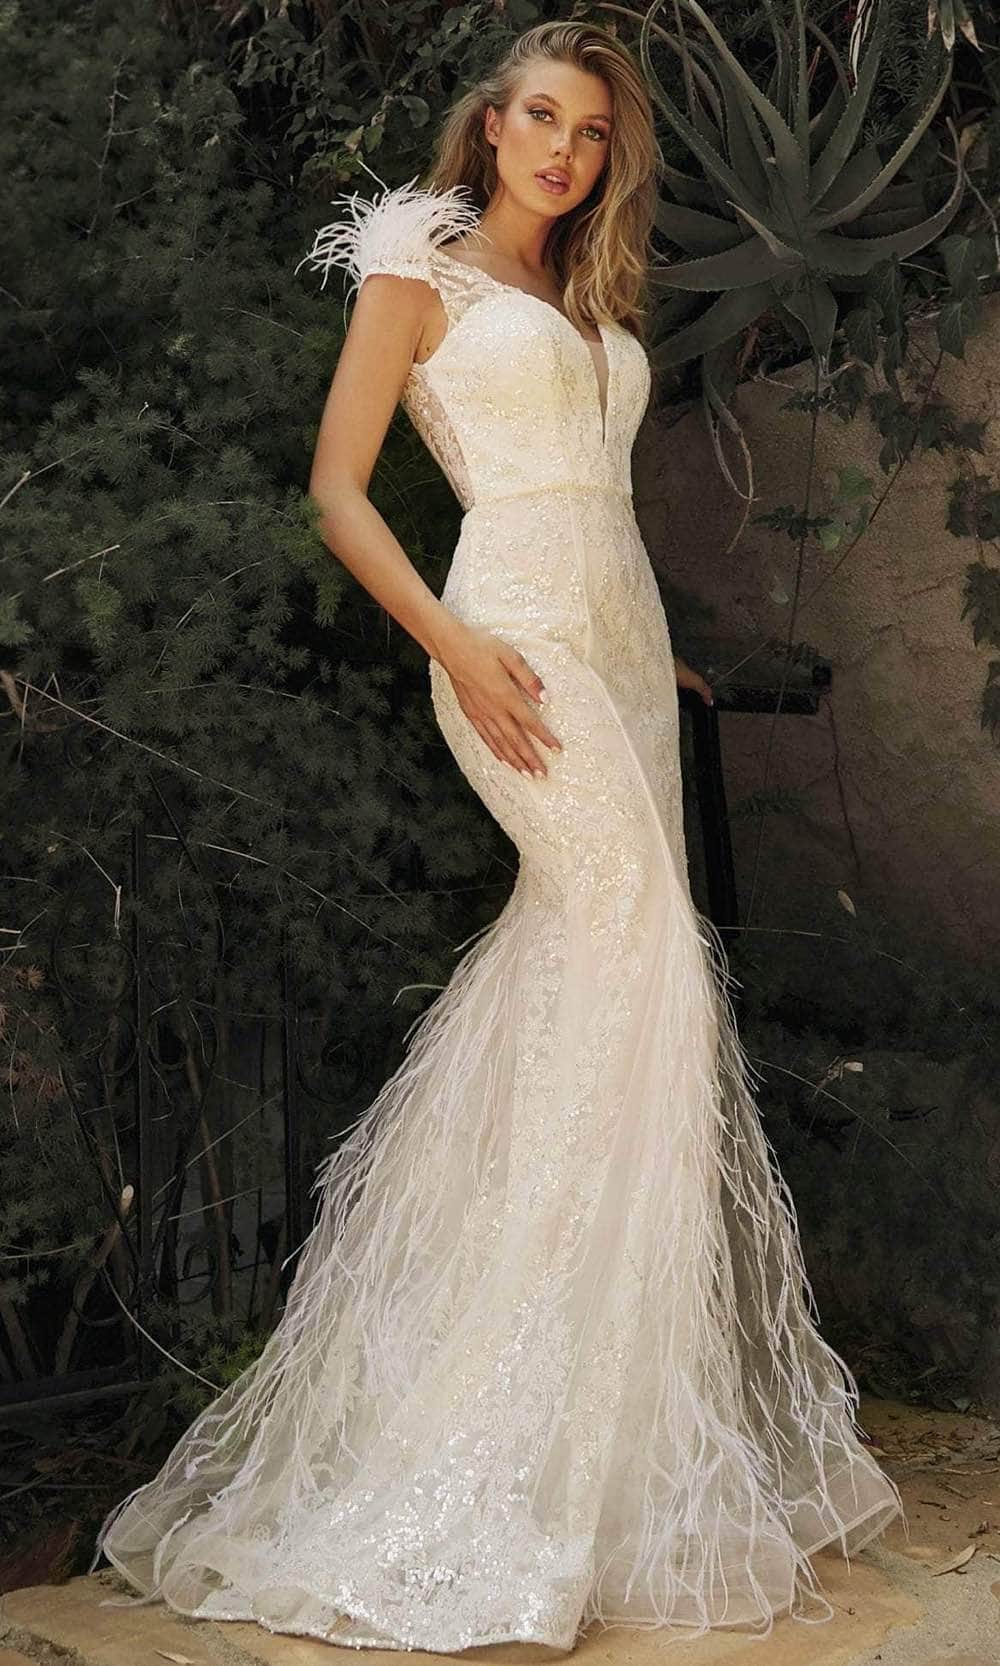 Image of Ladivine C57W - Feather Embellished Bridal Gown